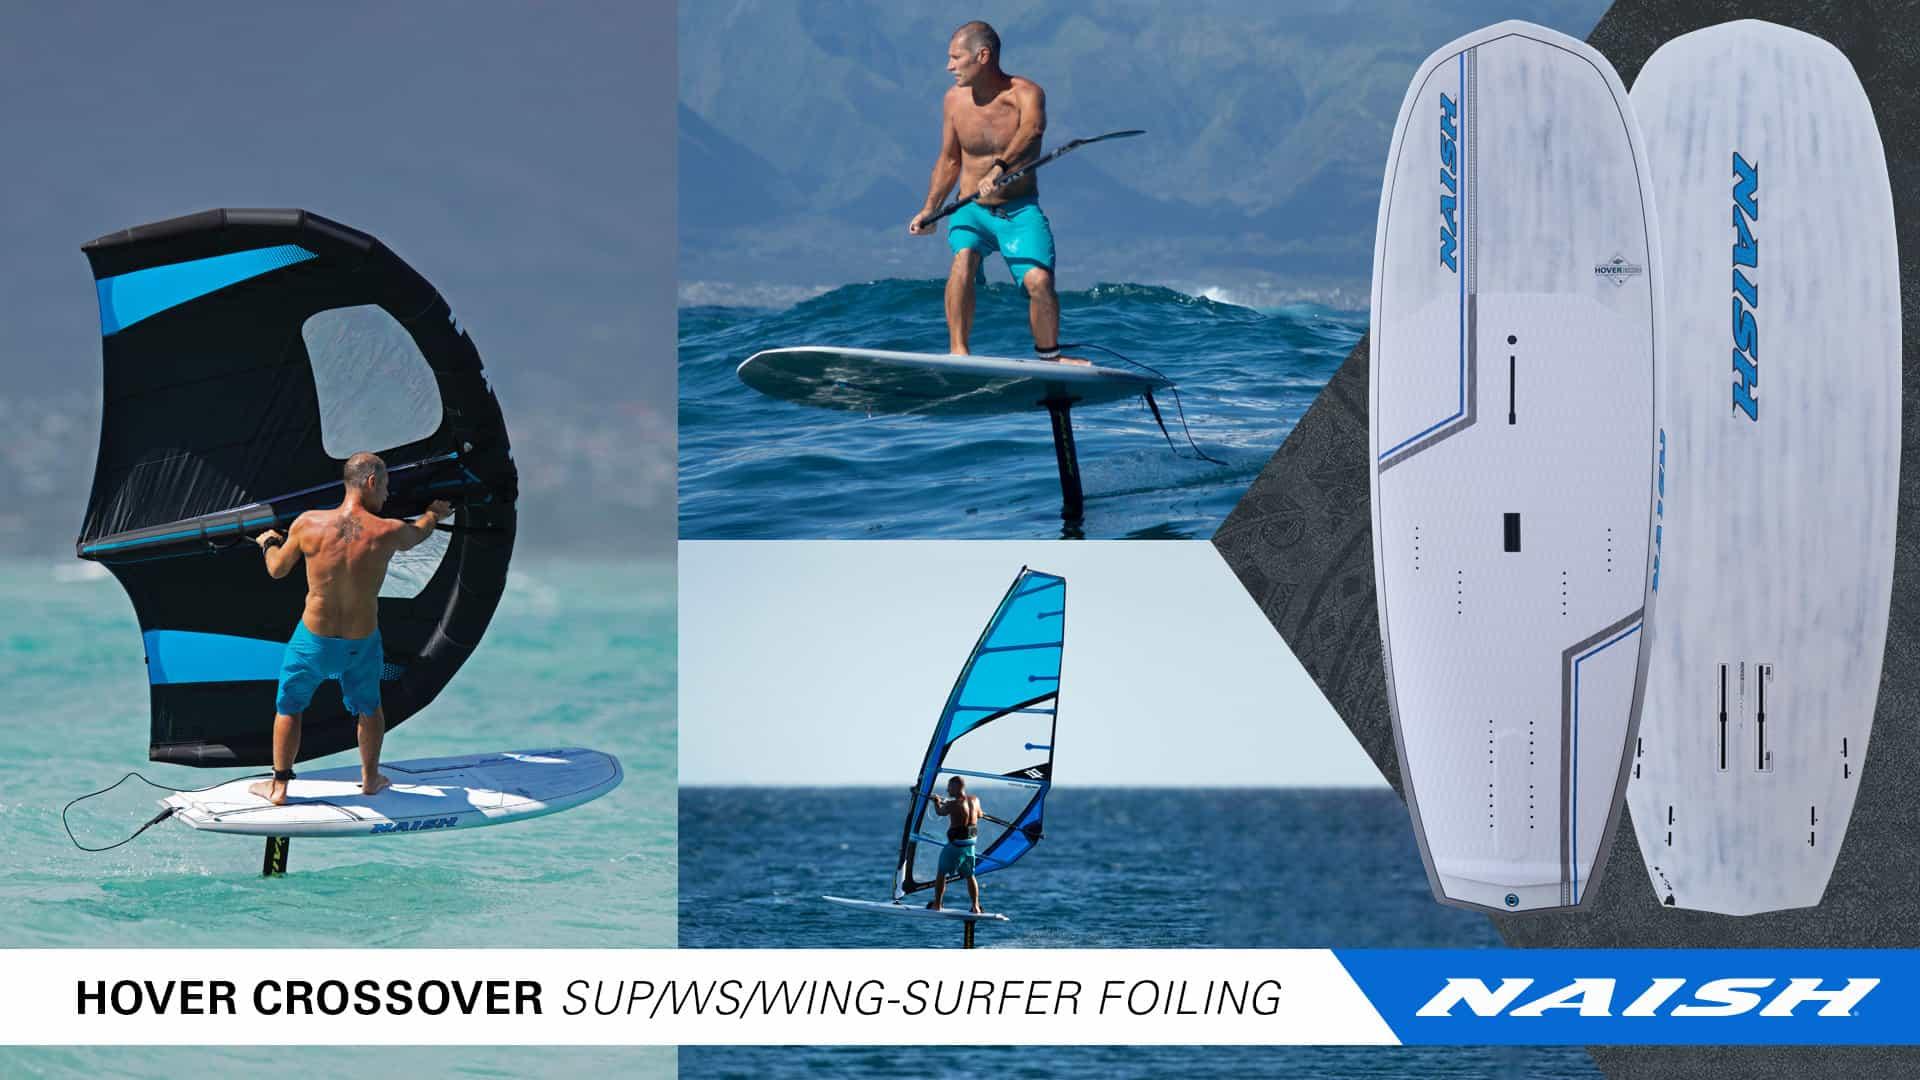 Meet the New Hover Crossover Foilboard - Naish.com